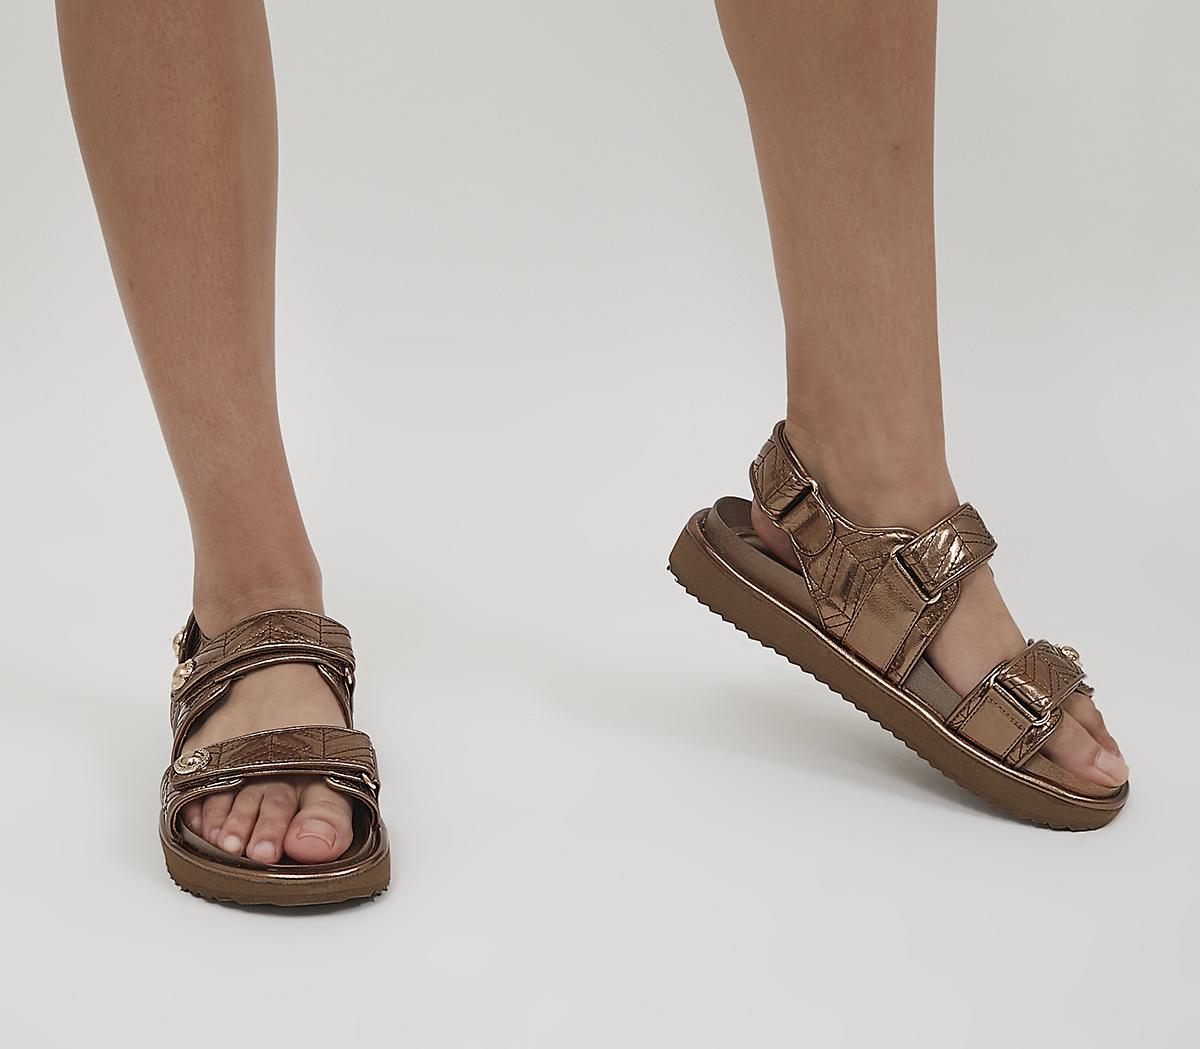 Scanning Double Strap Studded Sandals